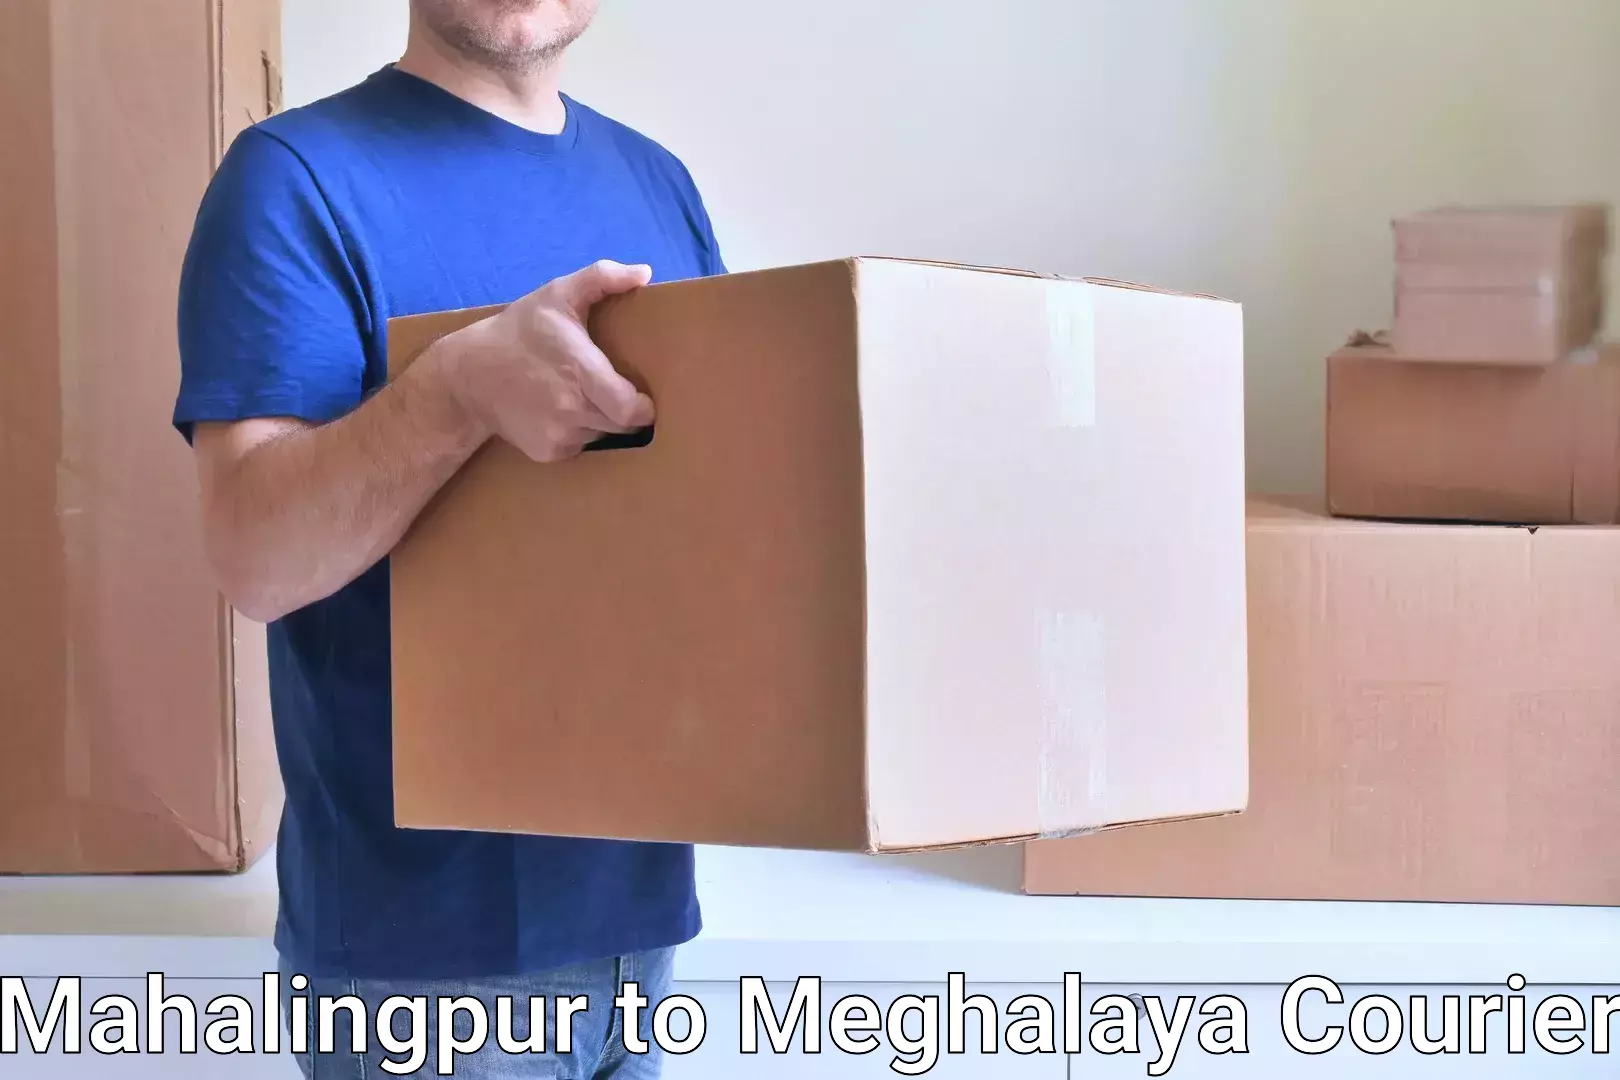 Package delivery network Mahalingpur to Tura